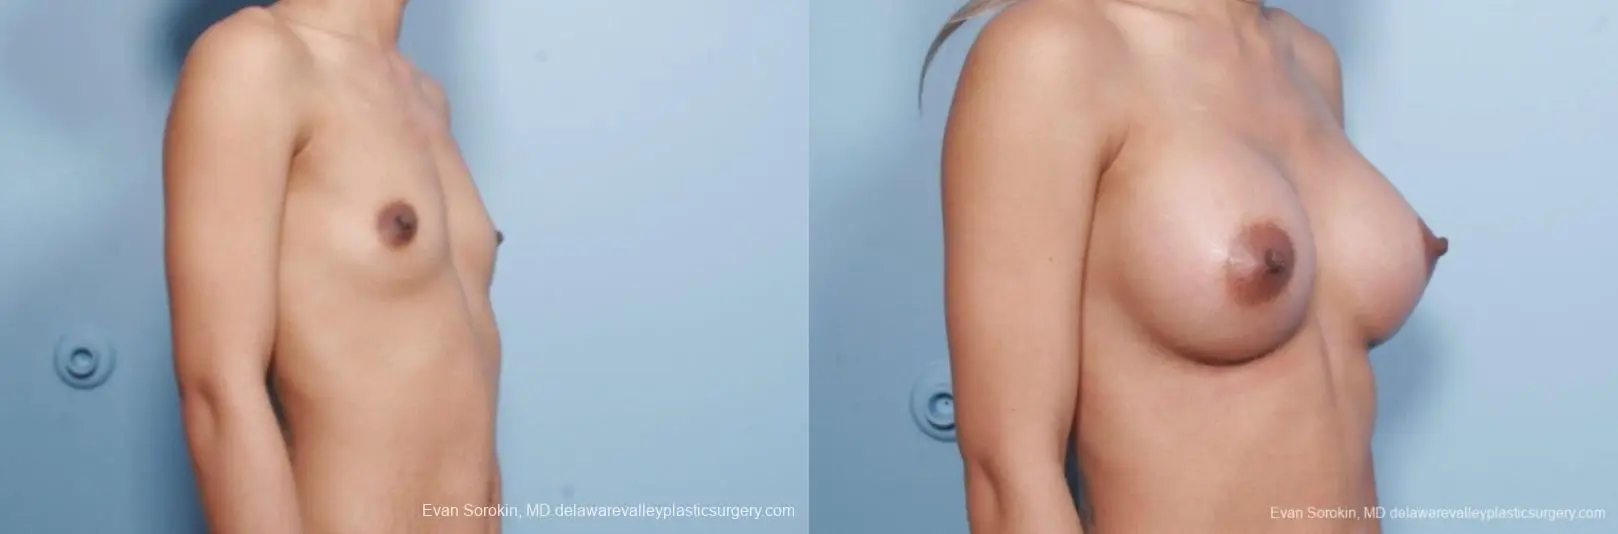 Philadelphia Breast Augmentation 9106 - Before and After 2